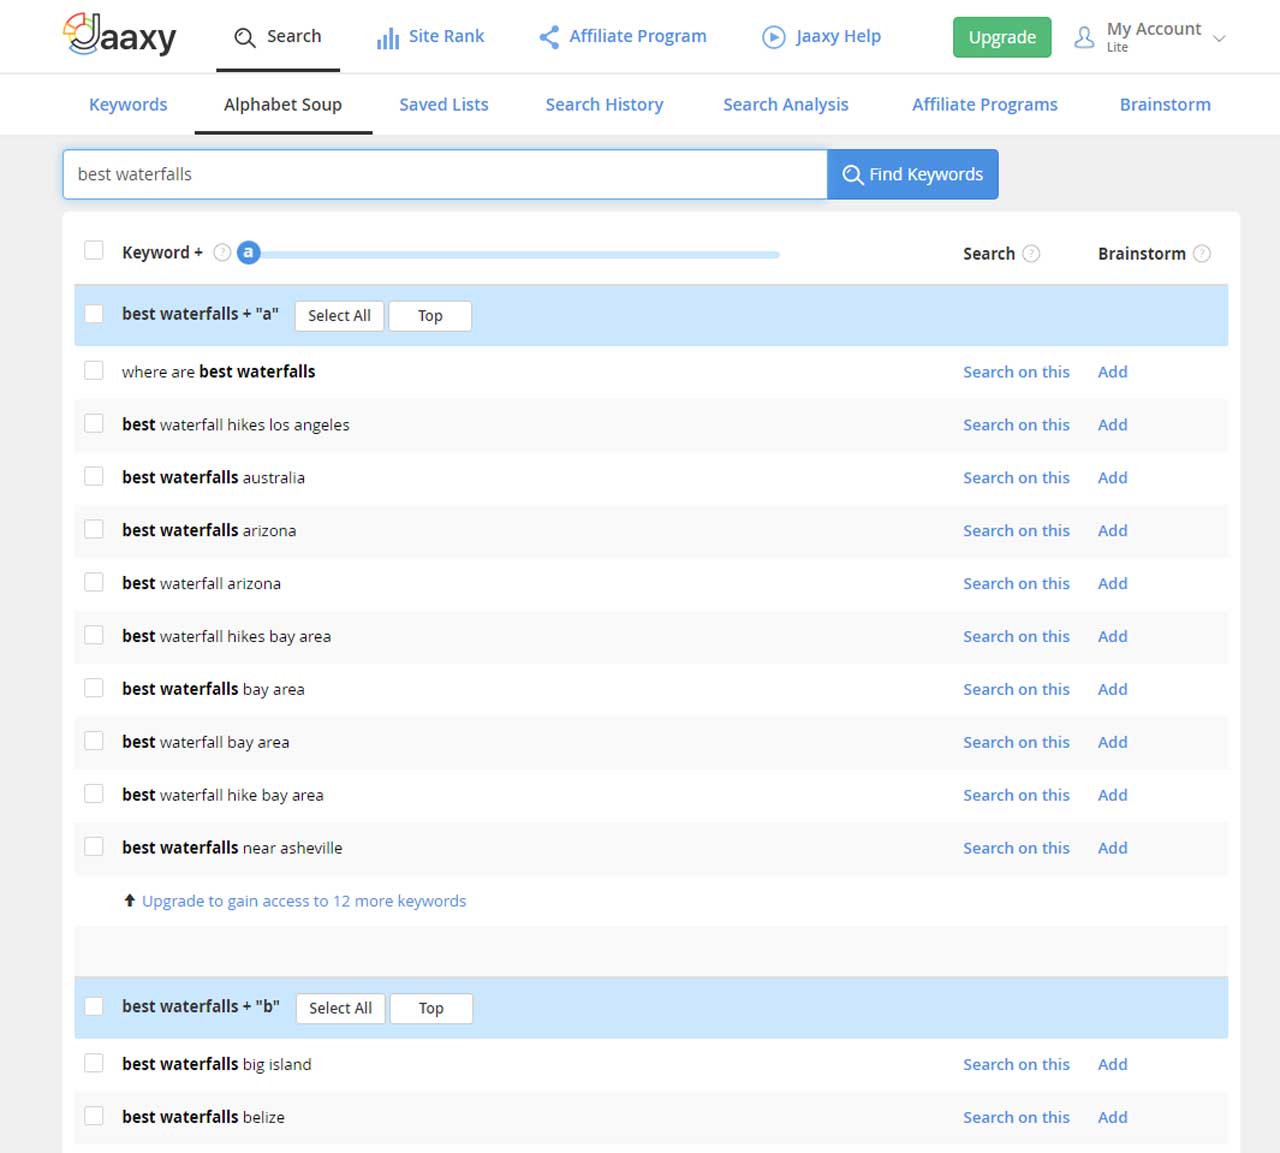 Screen capture of the Jaaxy keyword research tool, which comes with Wealthy Affiliate